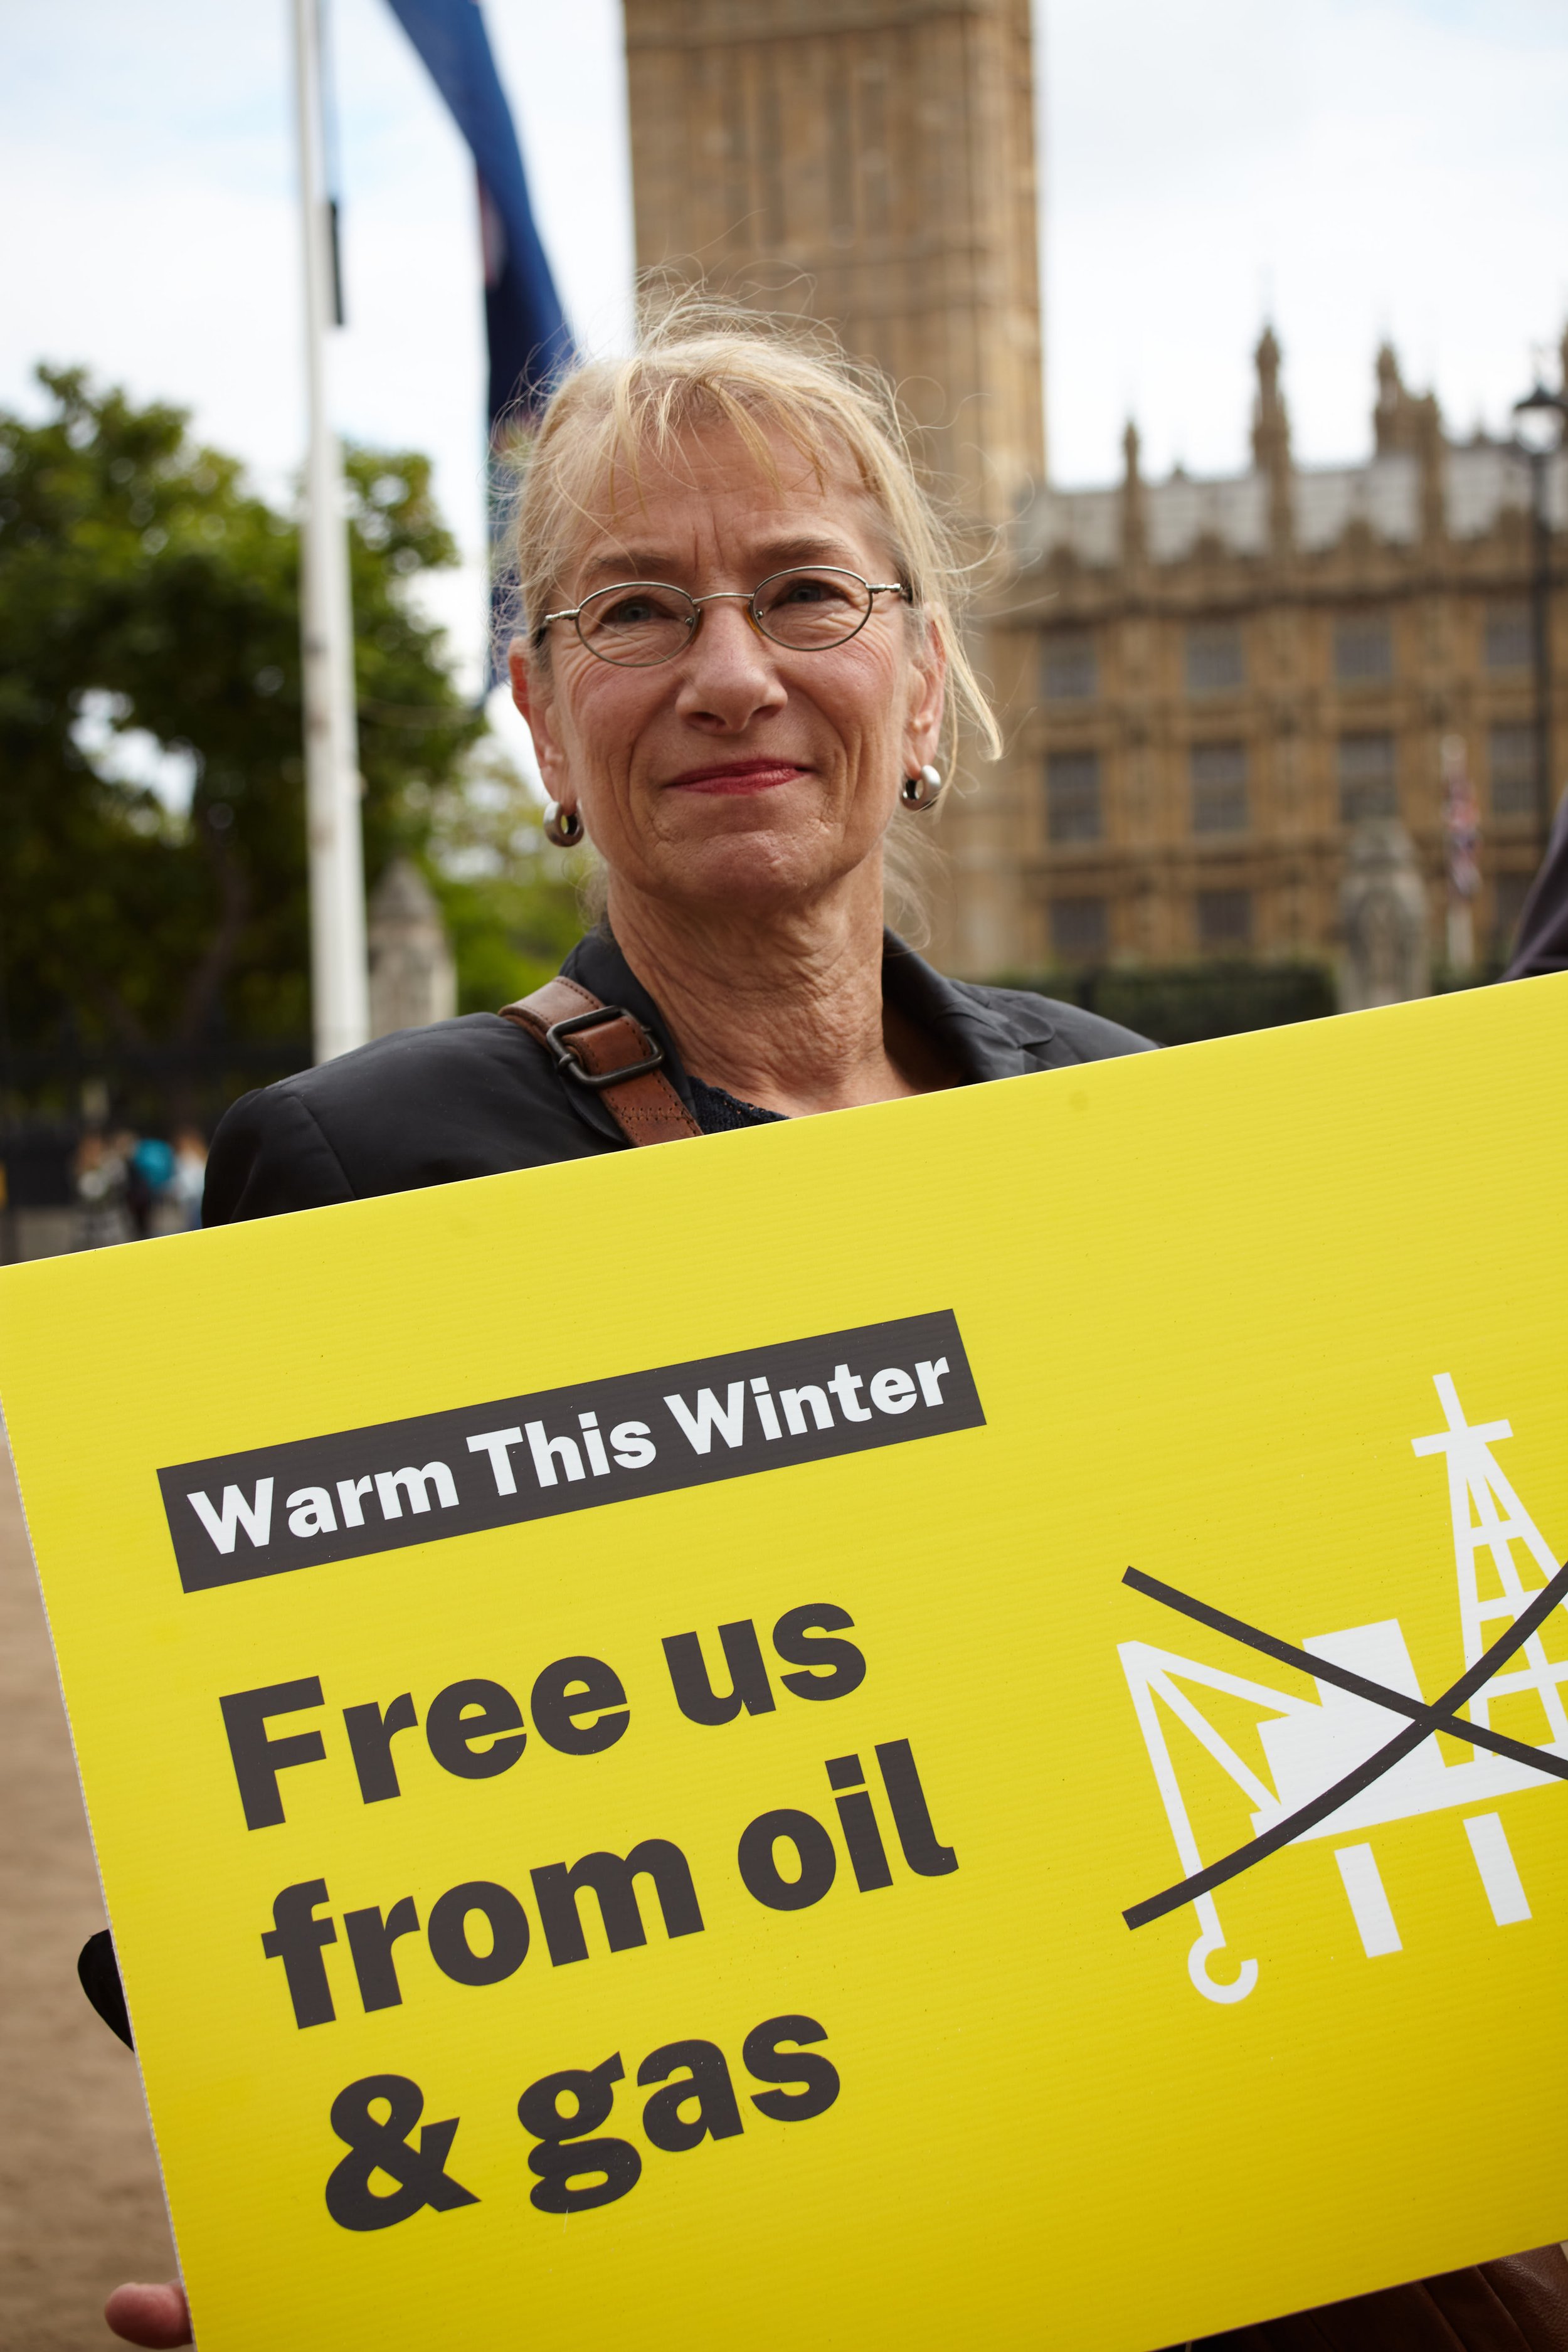 Portrait photograph by Hatty Frances Bell of a blonde woman holding a Warm This Winter placard at a political demonstration in London